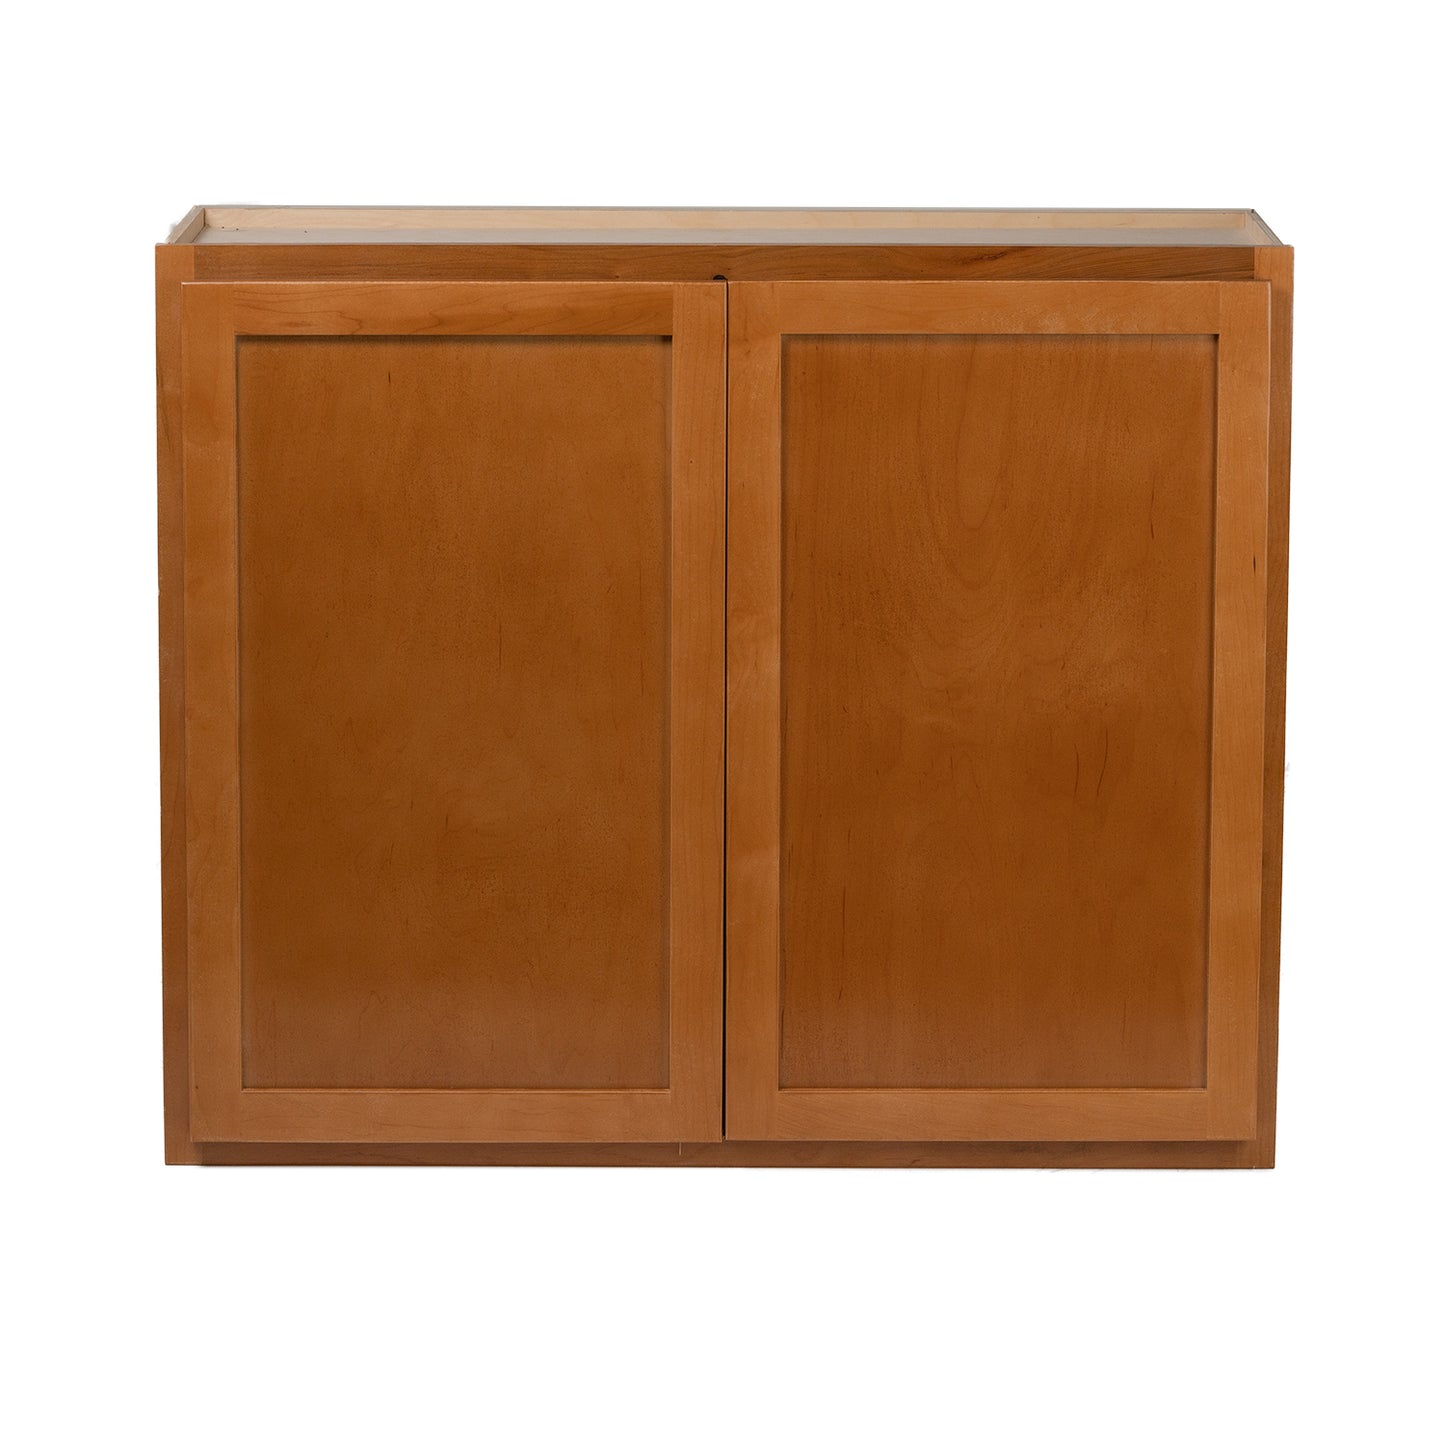 Quicklock RTA (Ready-to-Assemble) Provincial Stain 36"Wx30"Hx12"D Wall Cabinet